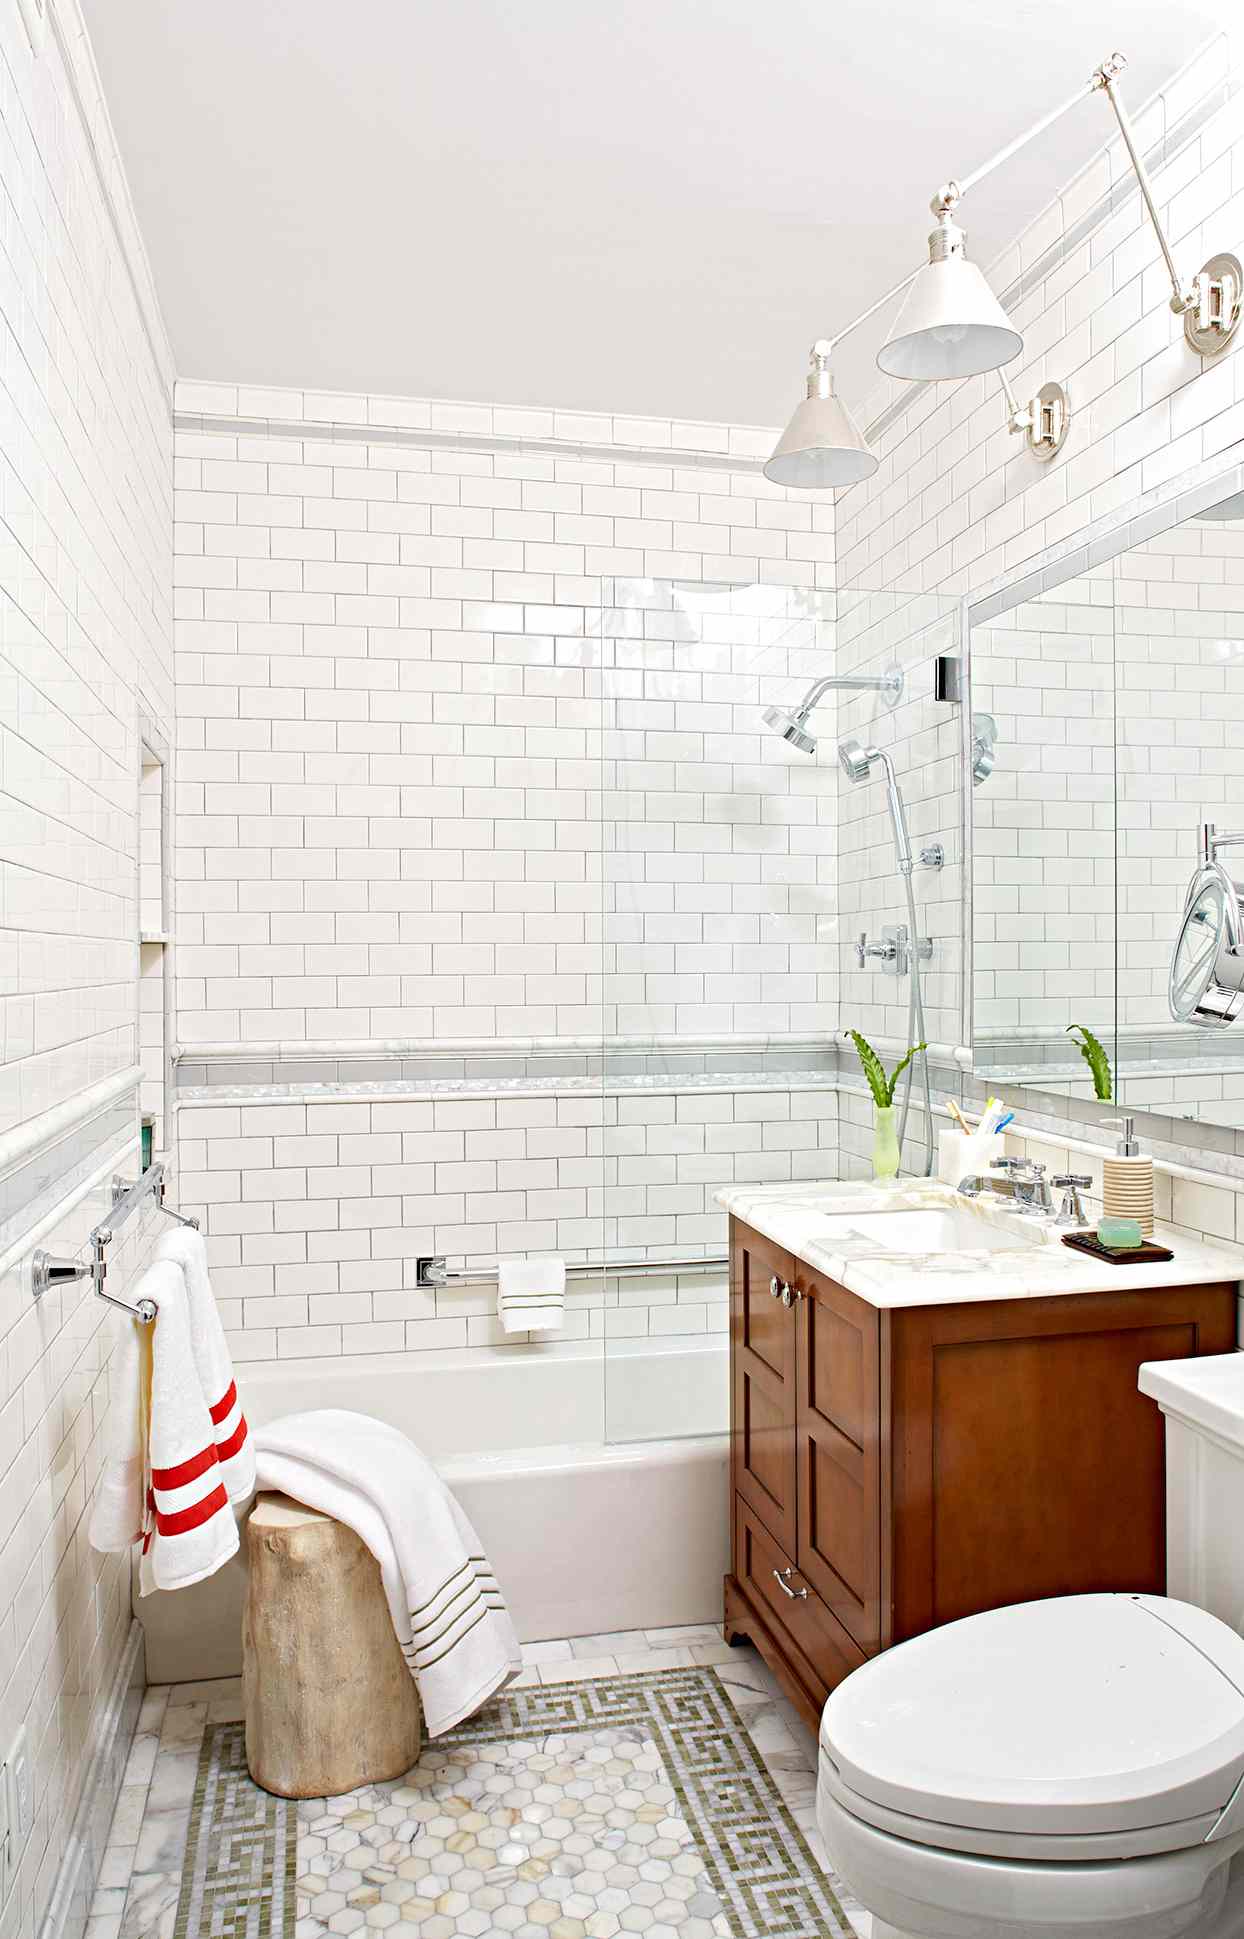 Tile A Shower Enclosure Or Tub Surround, How To Install Tile In Bathroom Shower